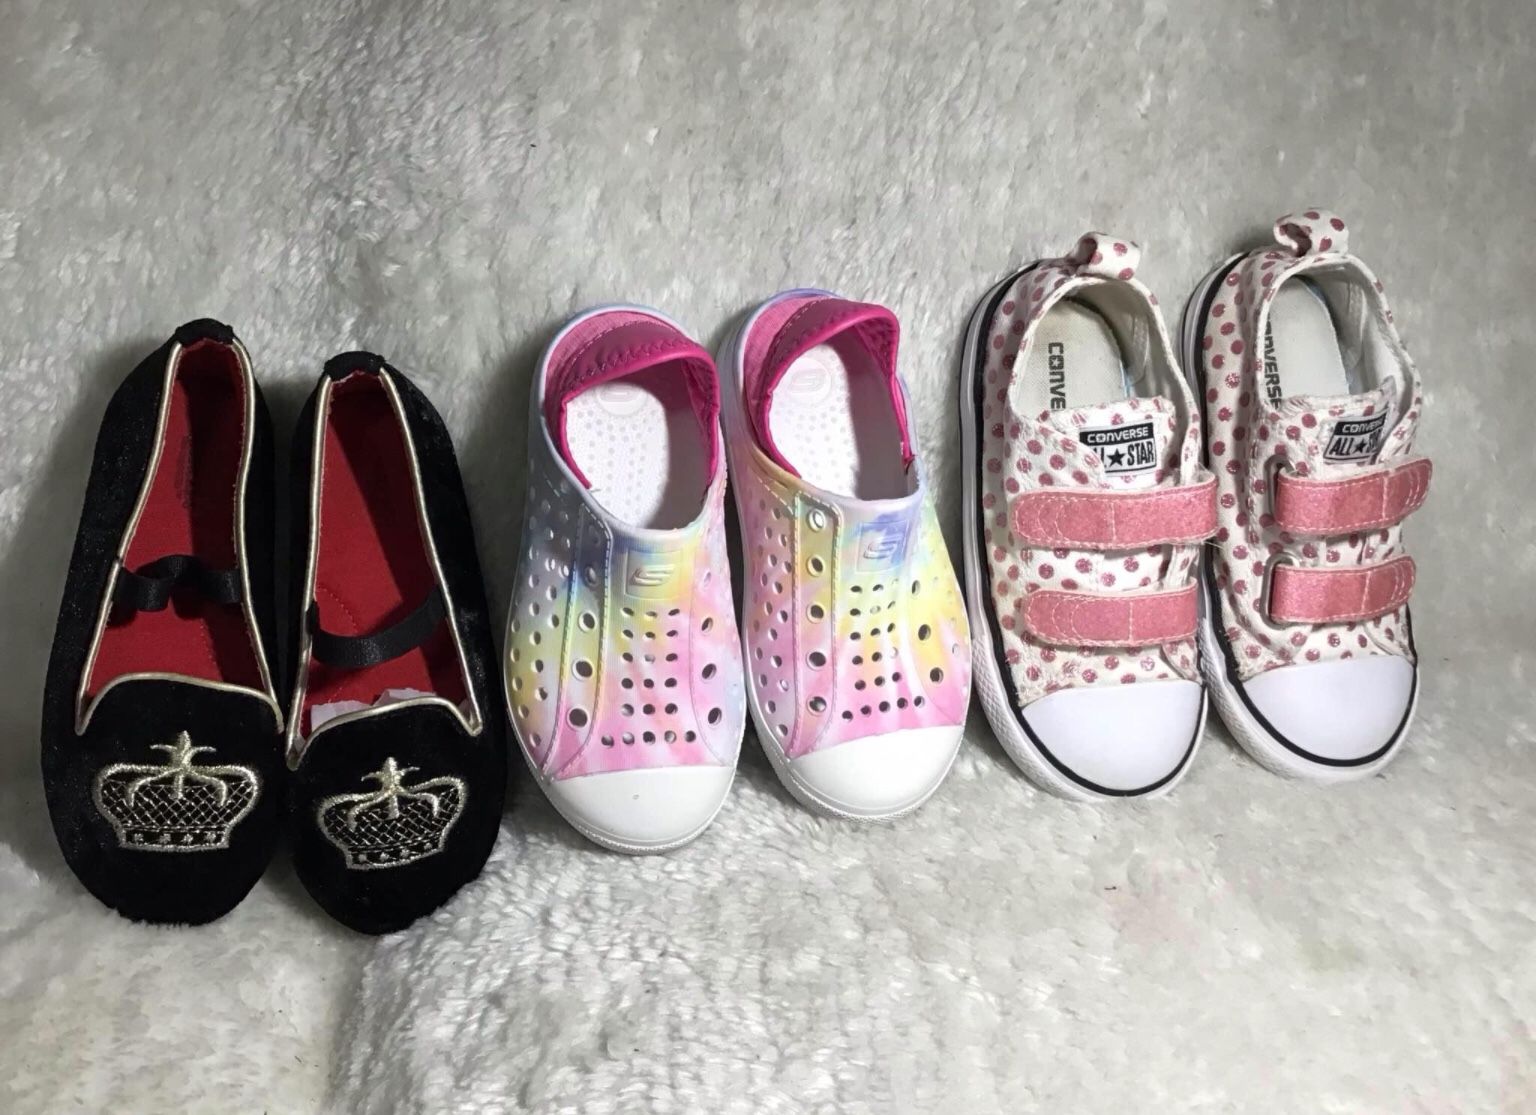 Girls Shoes Size 9/ Genuine Kids W Crown/ Skechers Colorful/ Converse Pink W White Dots $25